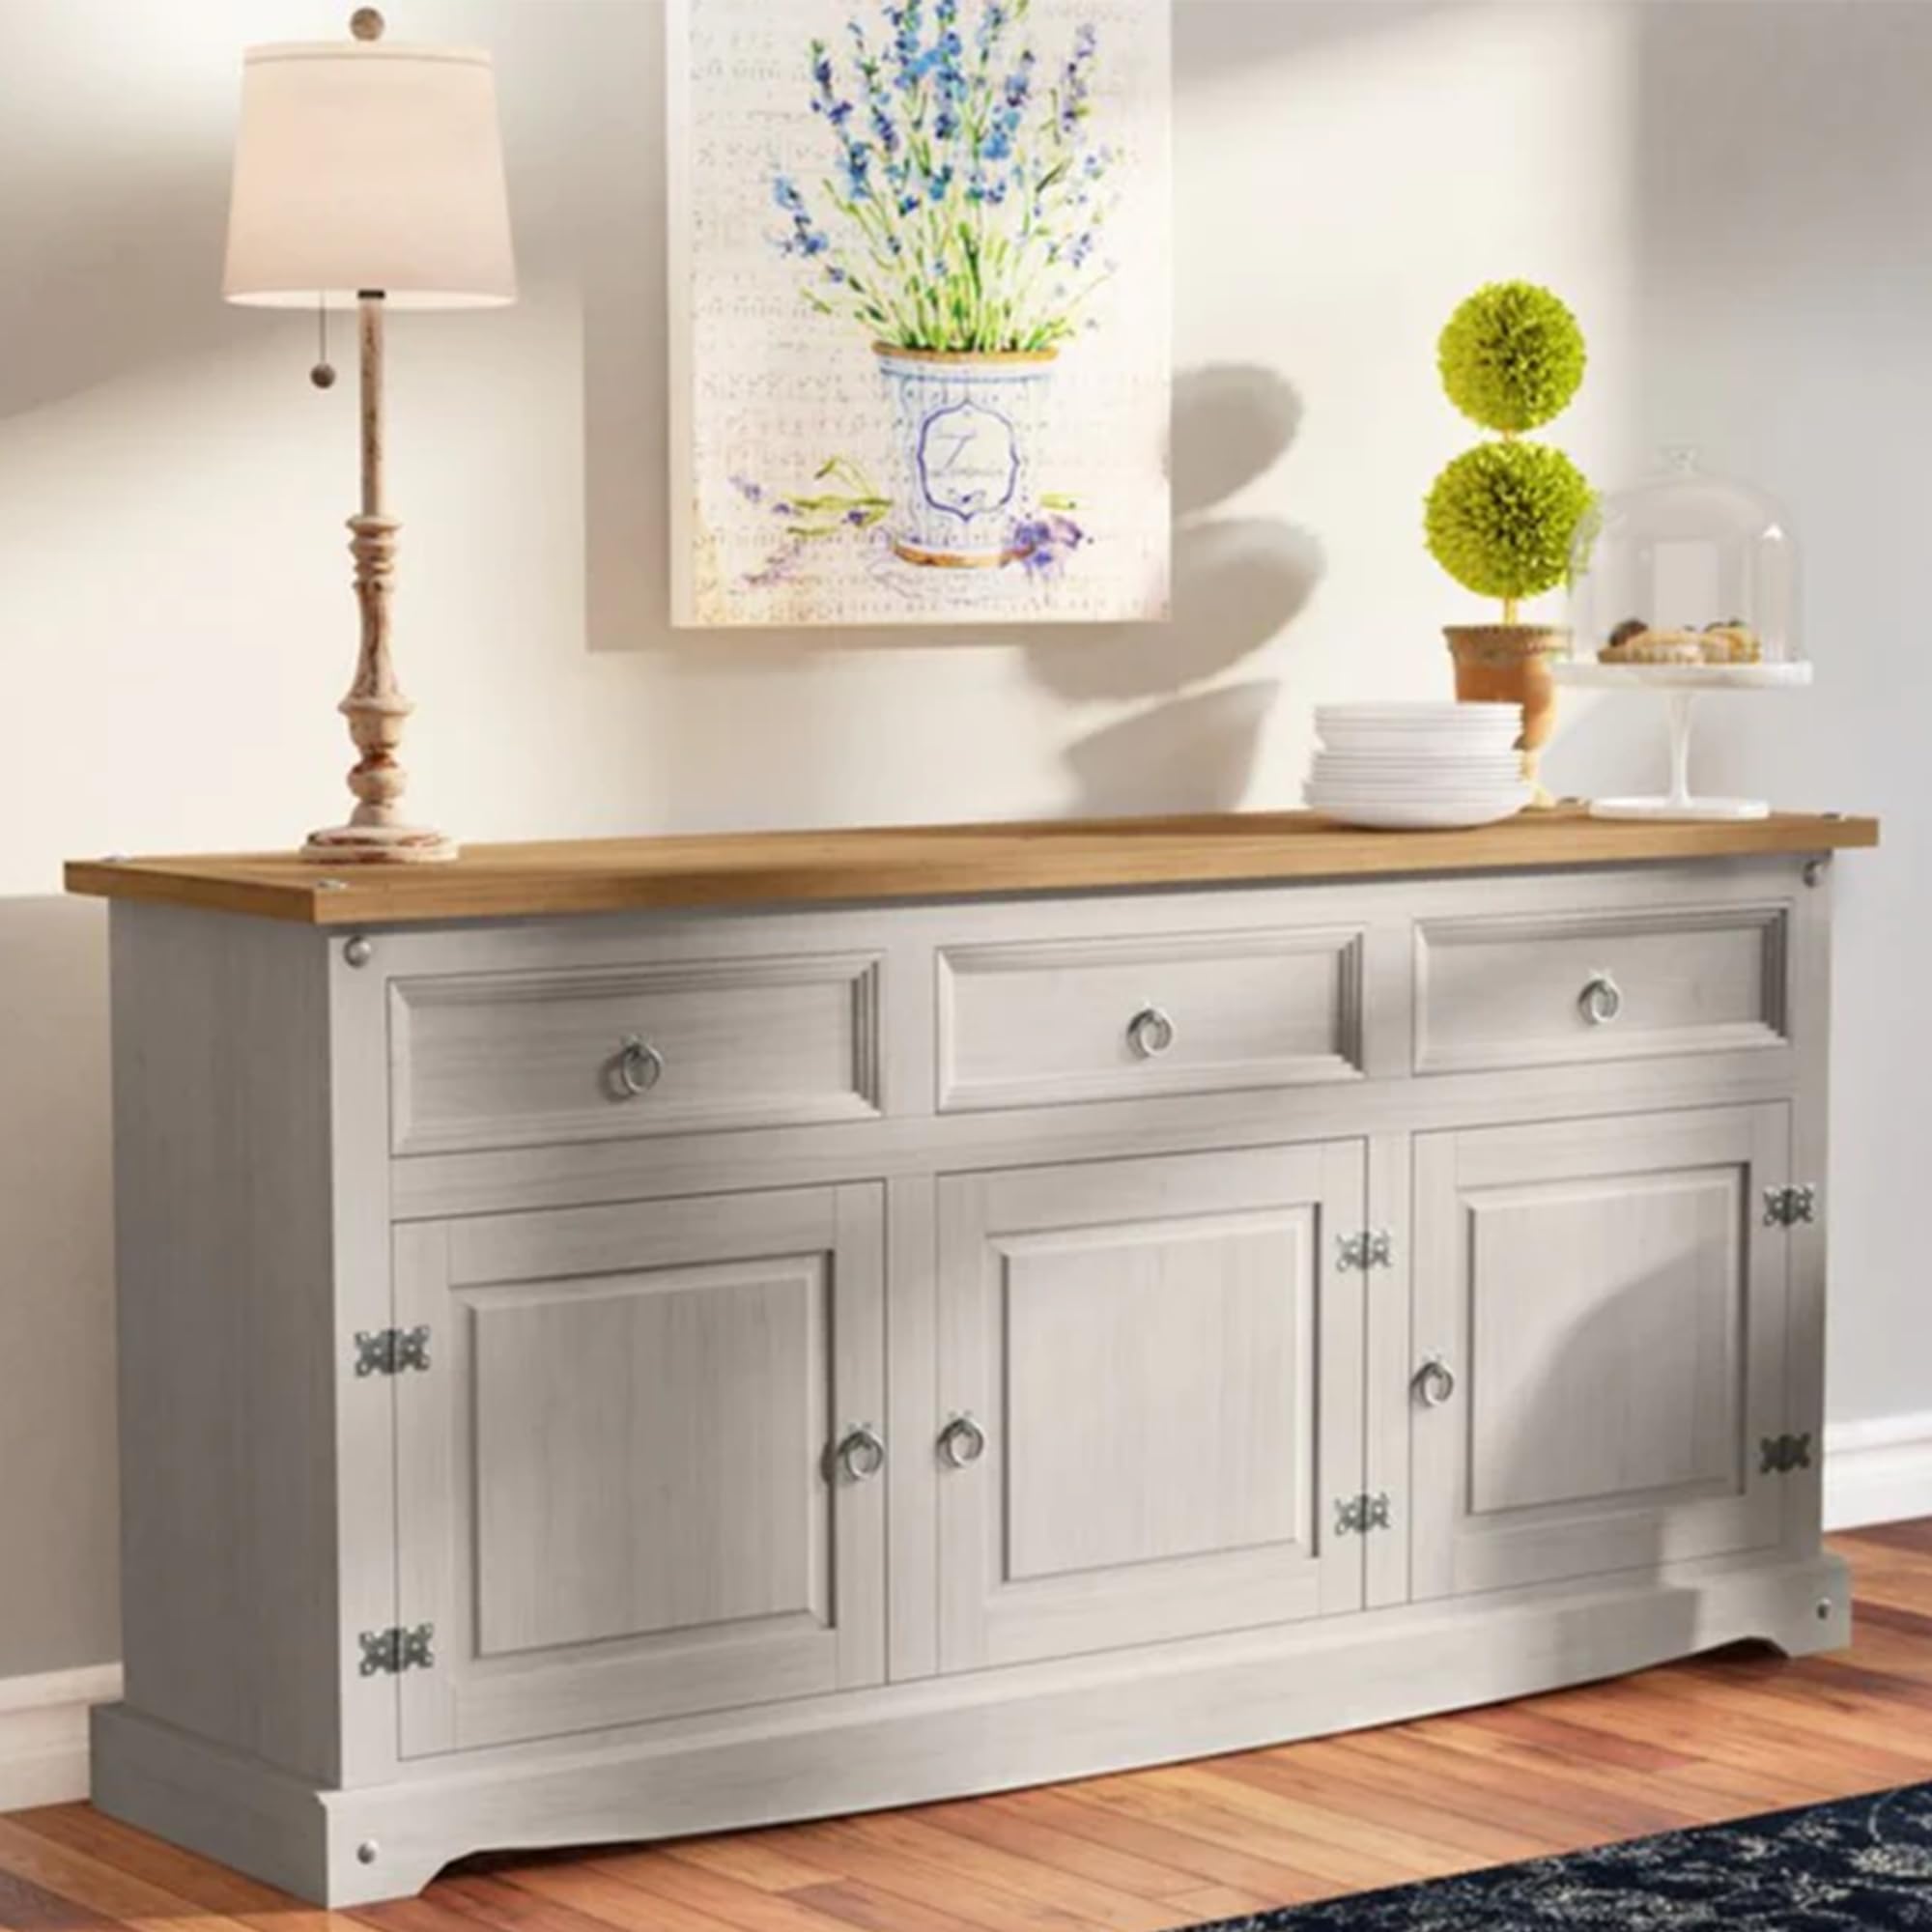 Furniture Dash Solid Wood Sideboard Buffet 65.9" W, 16.9" D, 31.6" H - Wooden Storage Cabinet, Cupboard Console Table, Ideal for Living Room, Kitchen Island, Dining Room